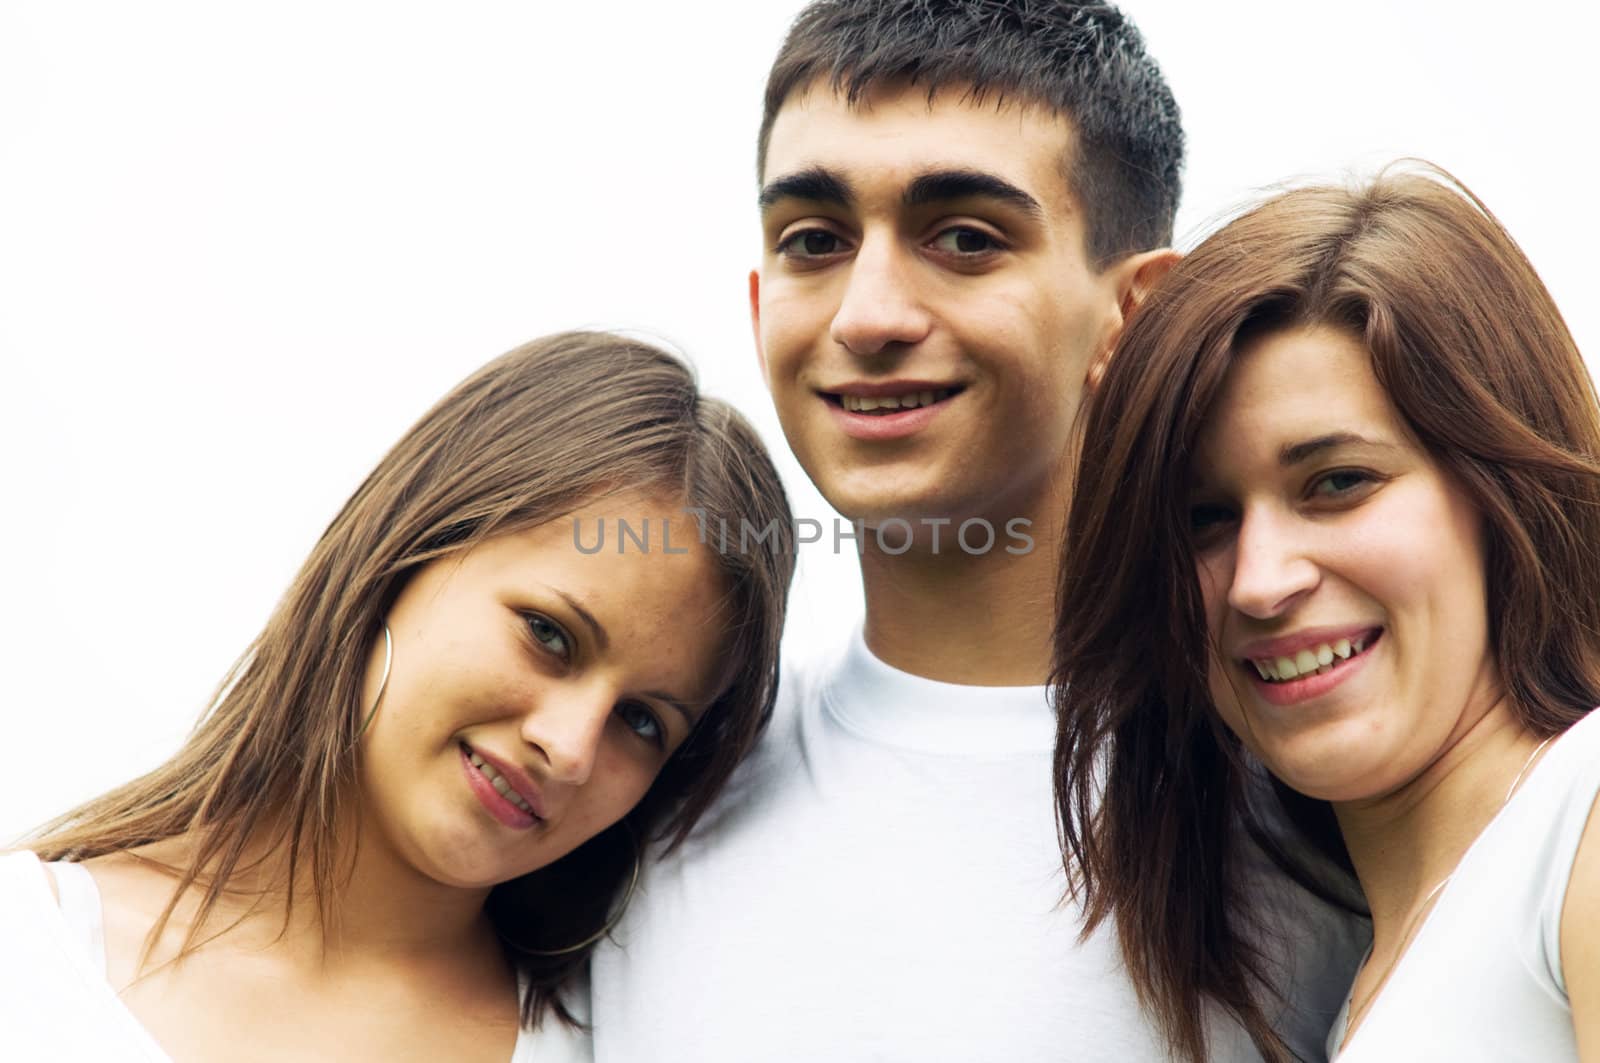 Three young happy friends standing together and smiling